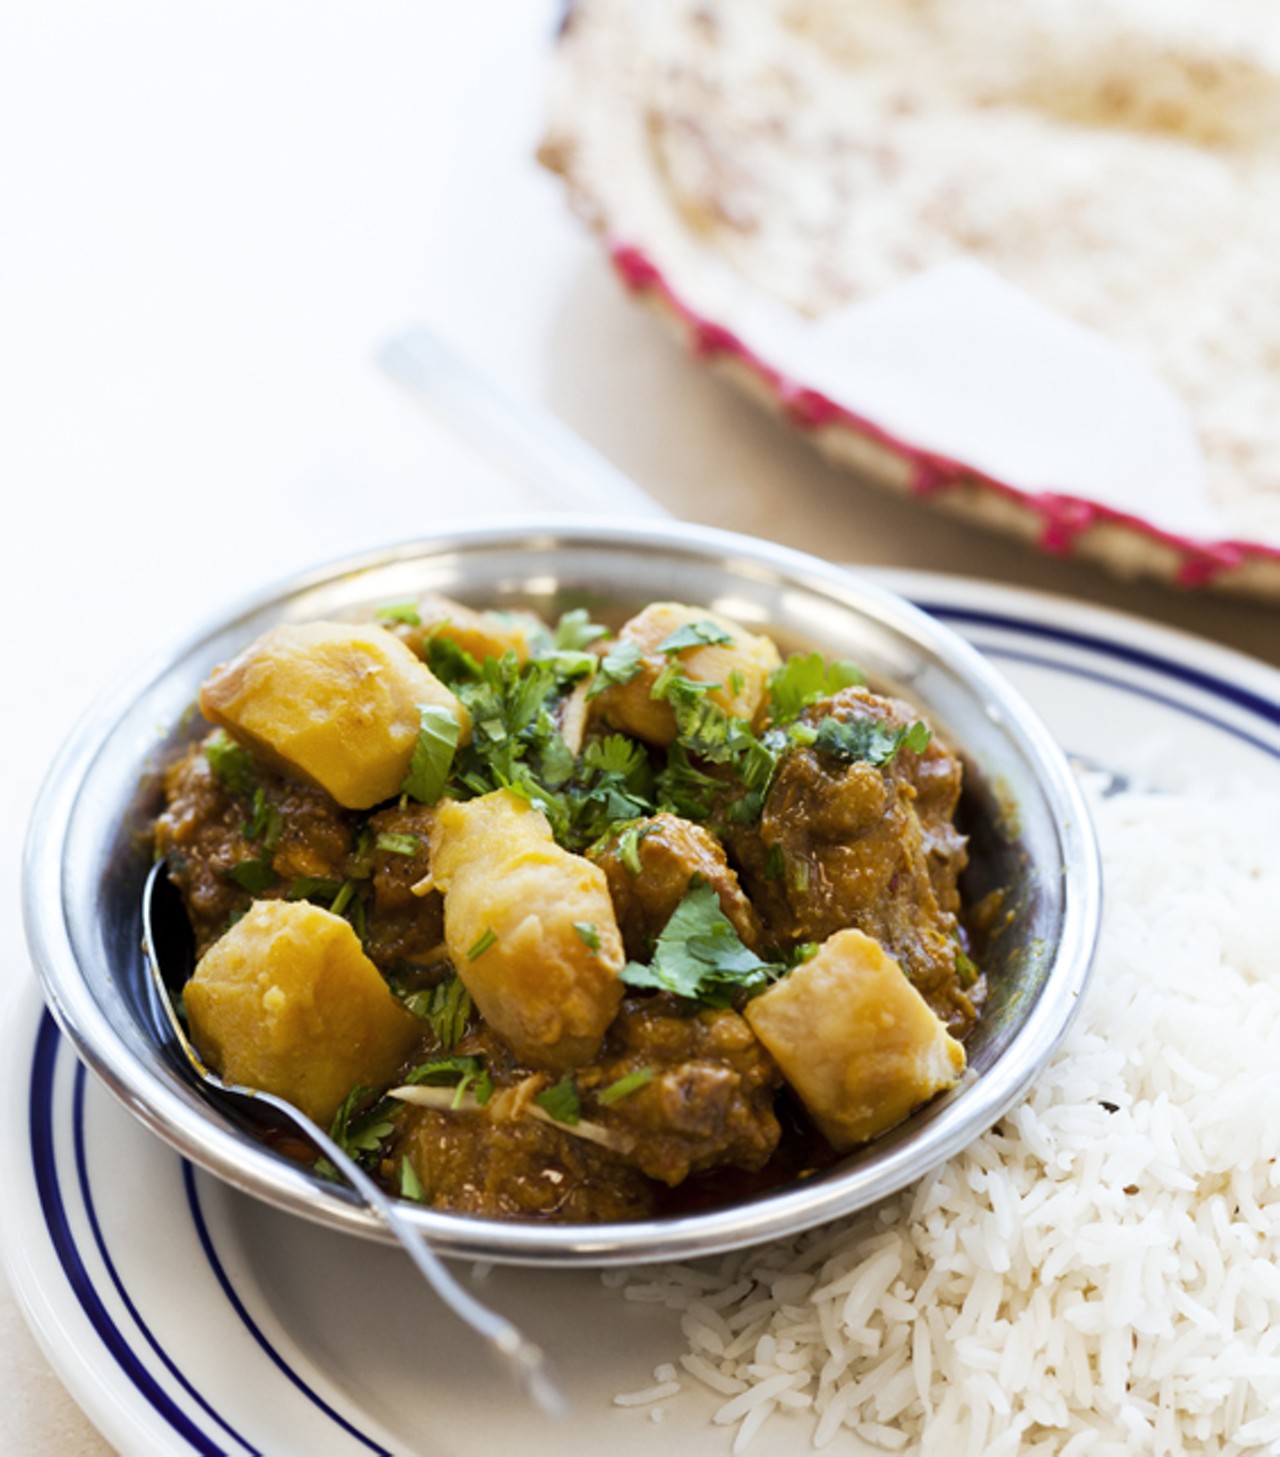 Chicken Vindaloo is cooked with potatoes, tomatoes and spices.